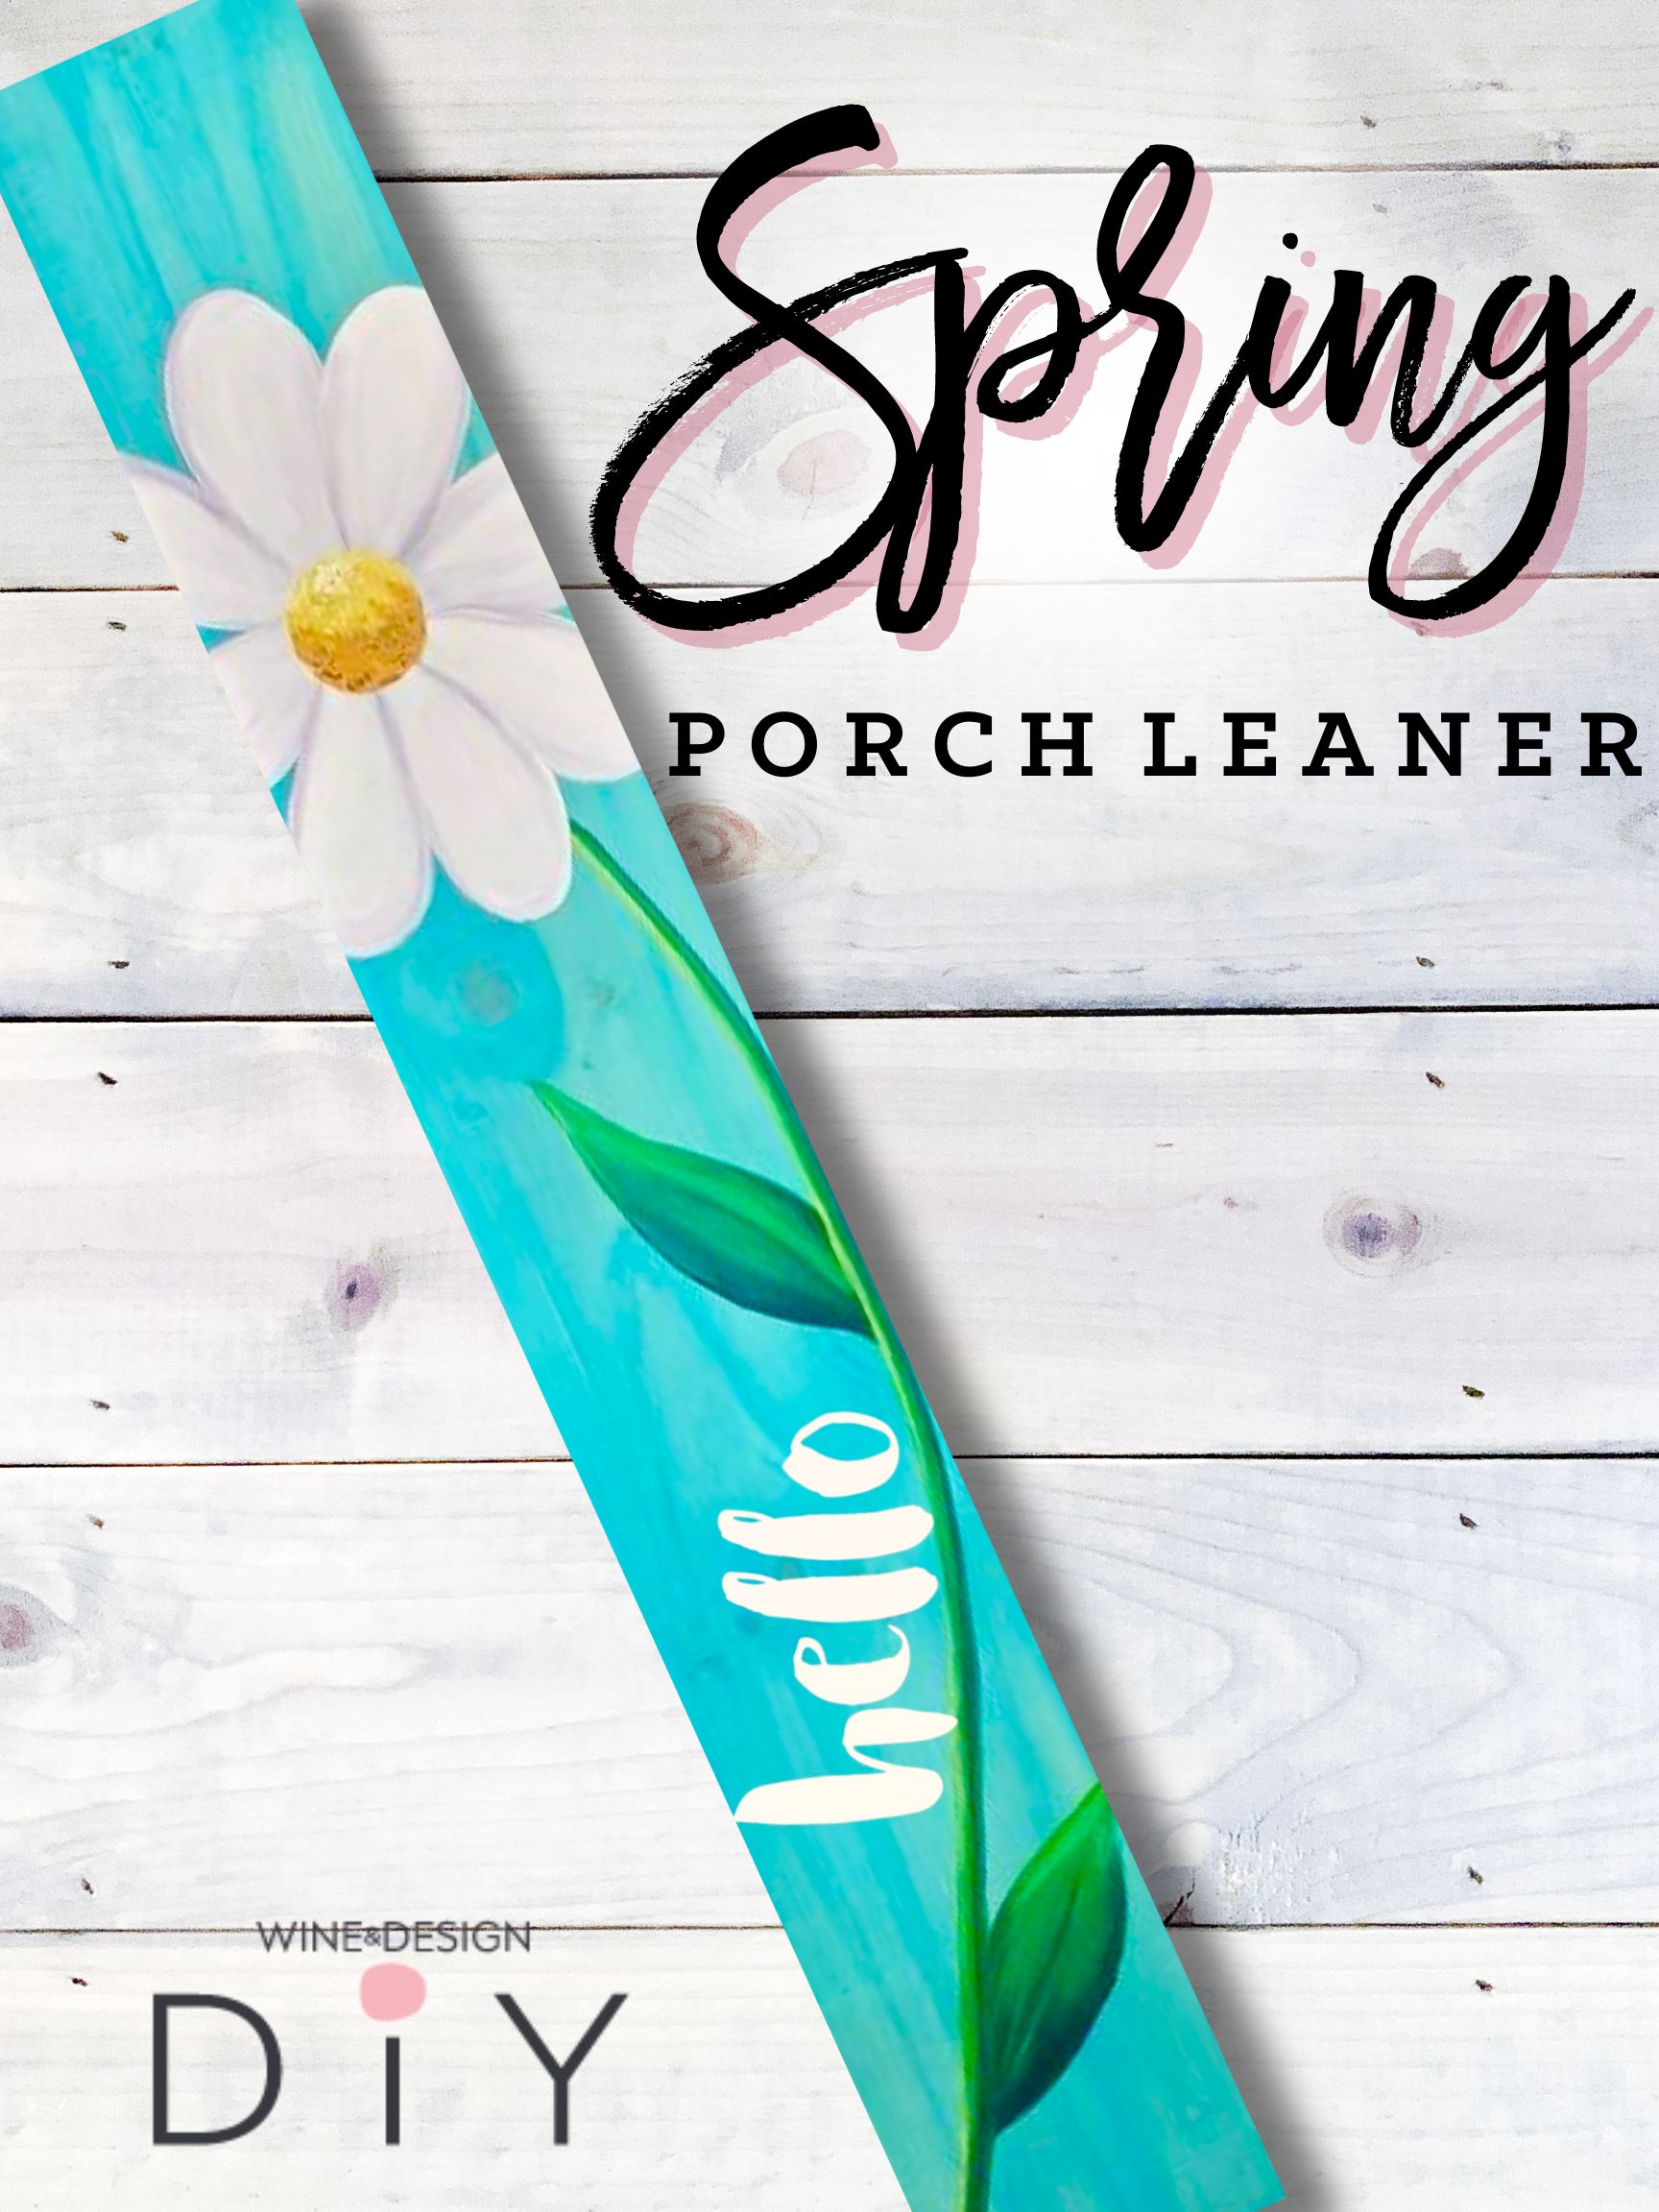 DIY: Porch Leaners *Create Your Own Design or Use Our Daisy Design